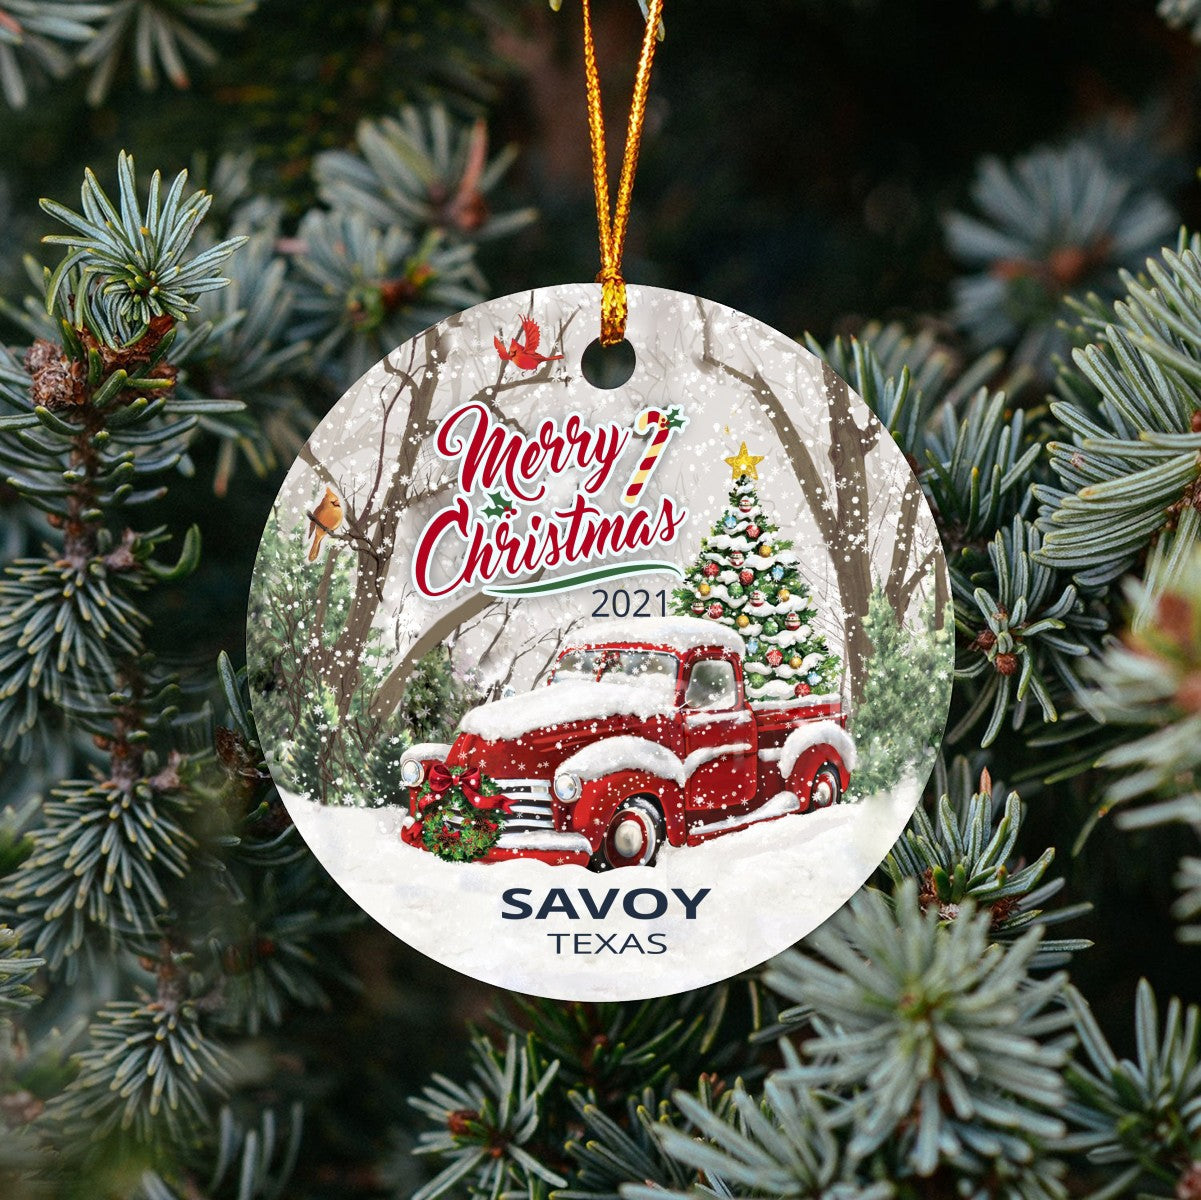 Christmas Tree Ornaments Savoy - Ornament With Name City, State Savoy Texas TX Ornament - Red Truck Xmas Ornaments 3'' Plastic Gift For Family, Friend And Housewarming